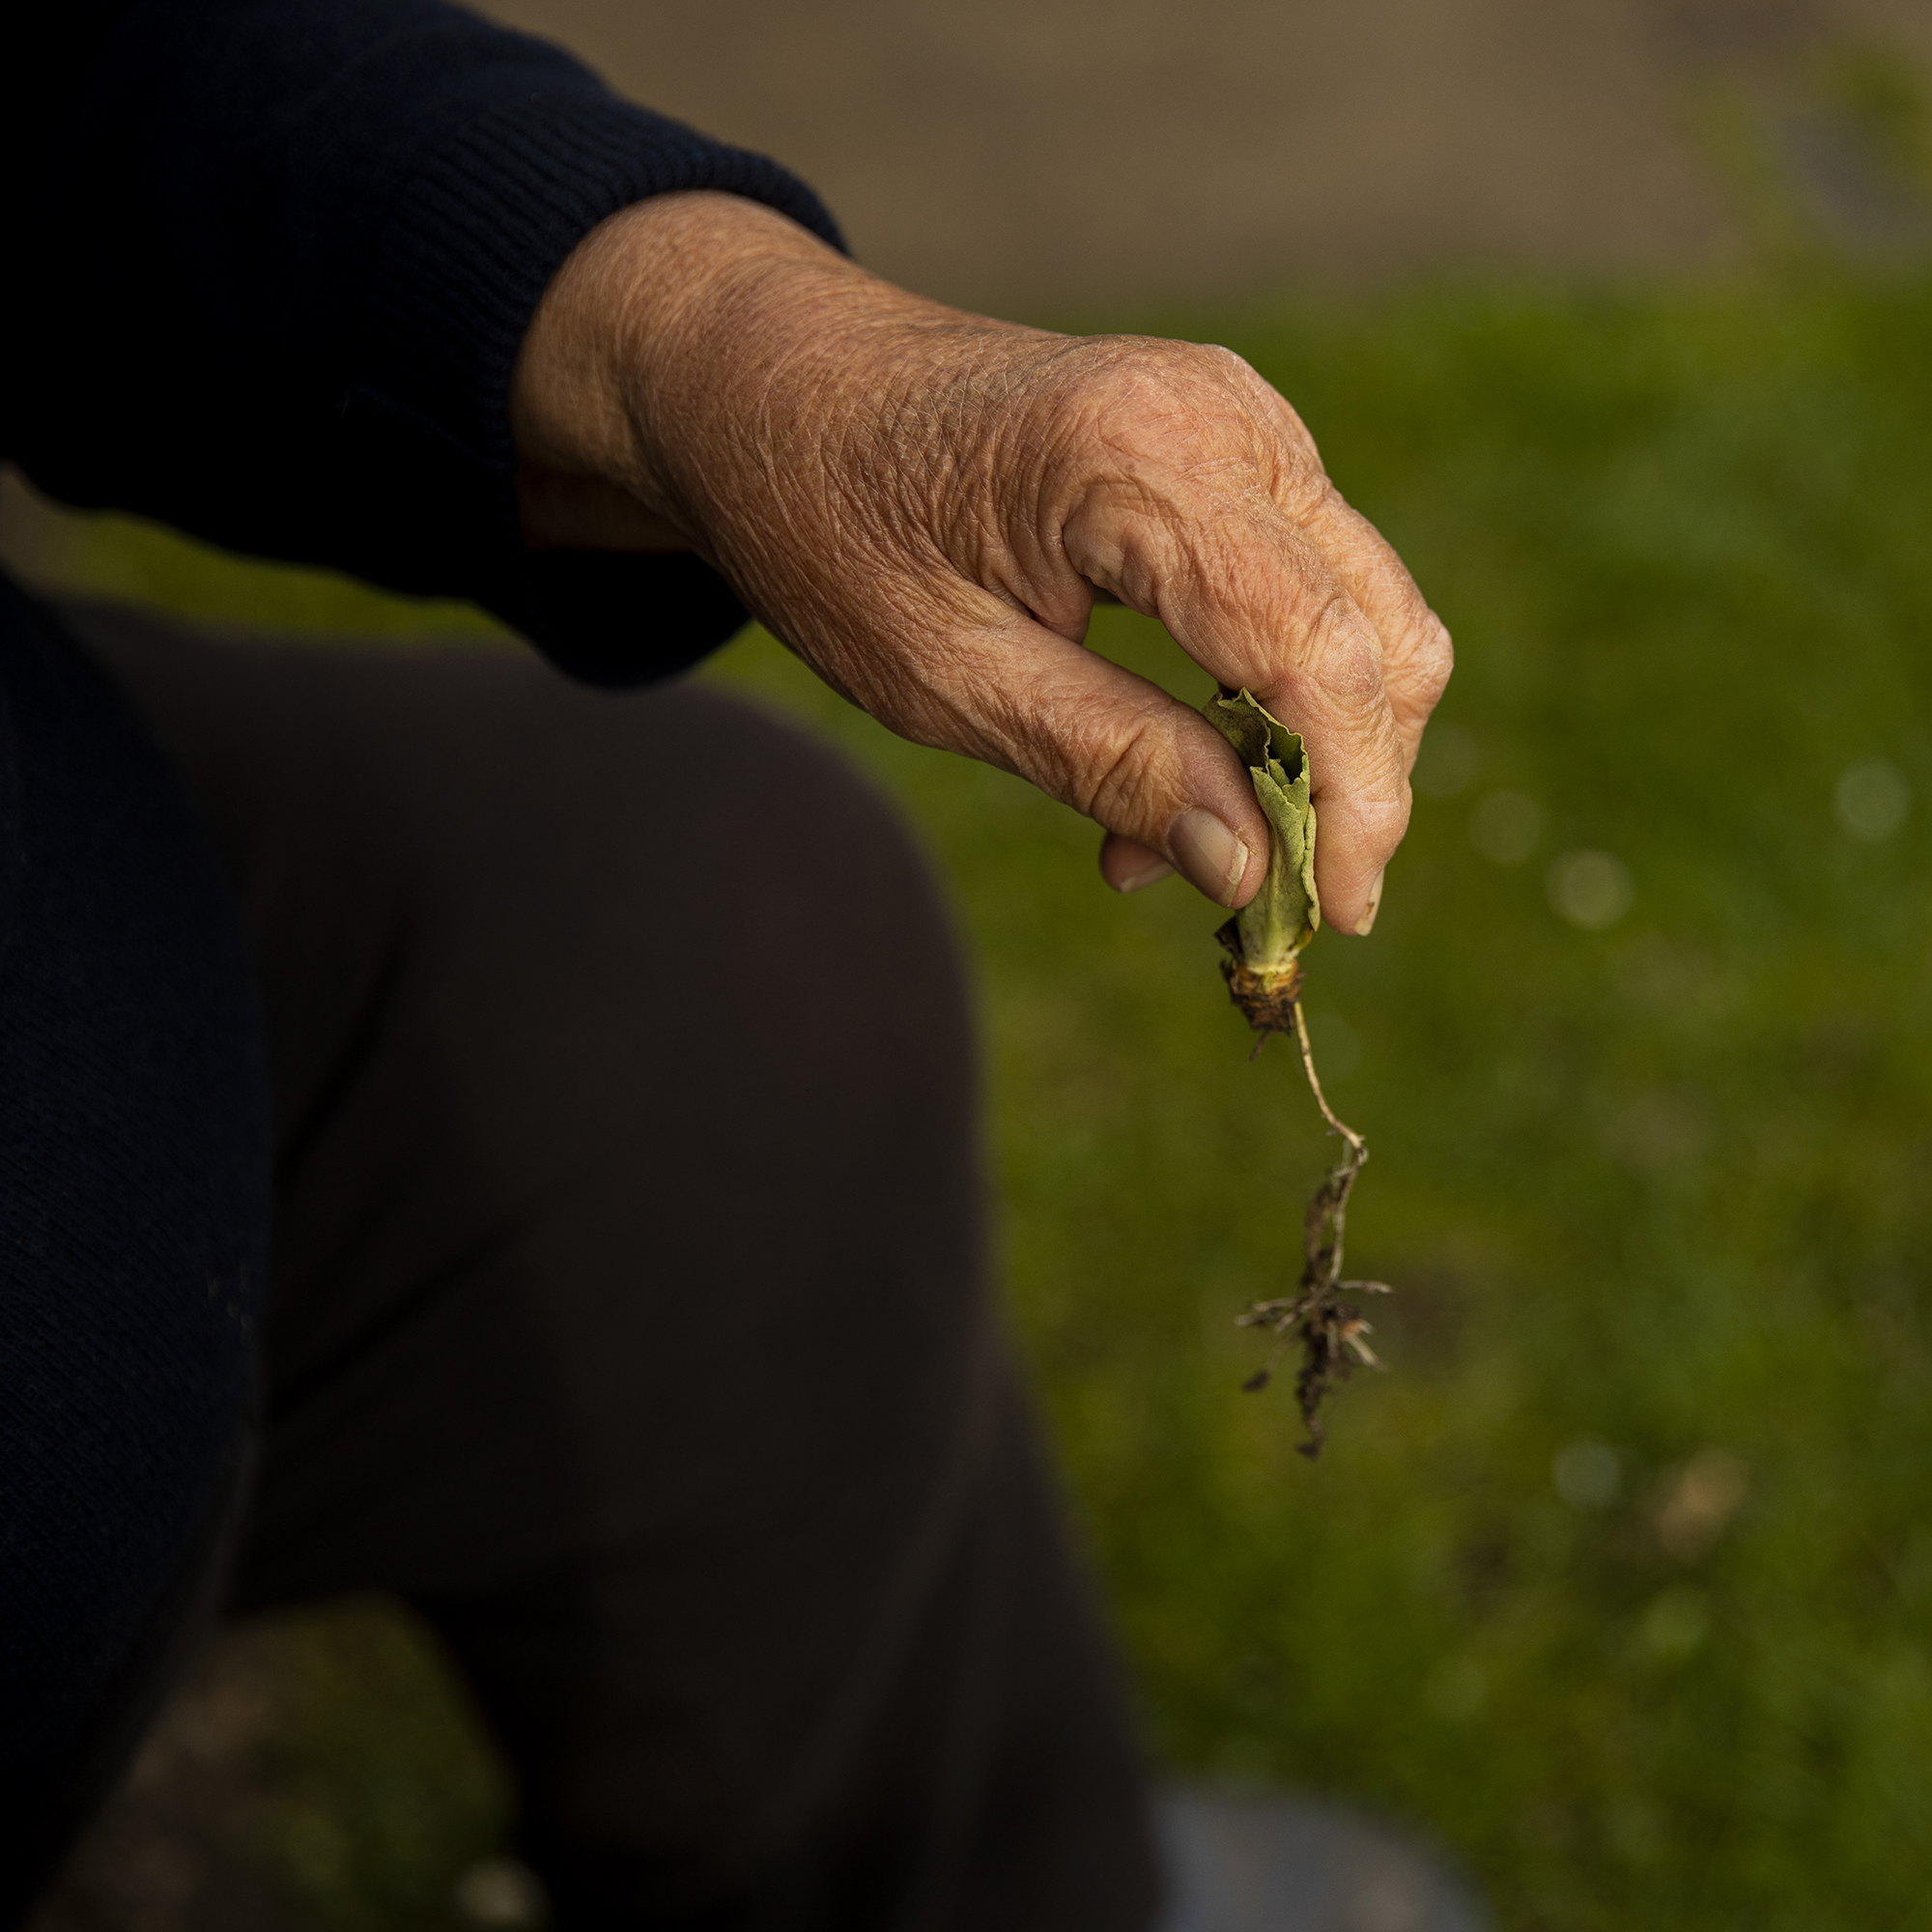 This image by BA Photography Student, Isabella Lamorna, shows her Grandma's hand in the process of repotting a plant.